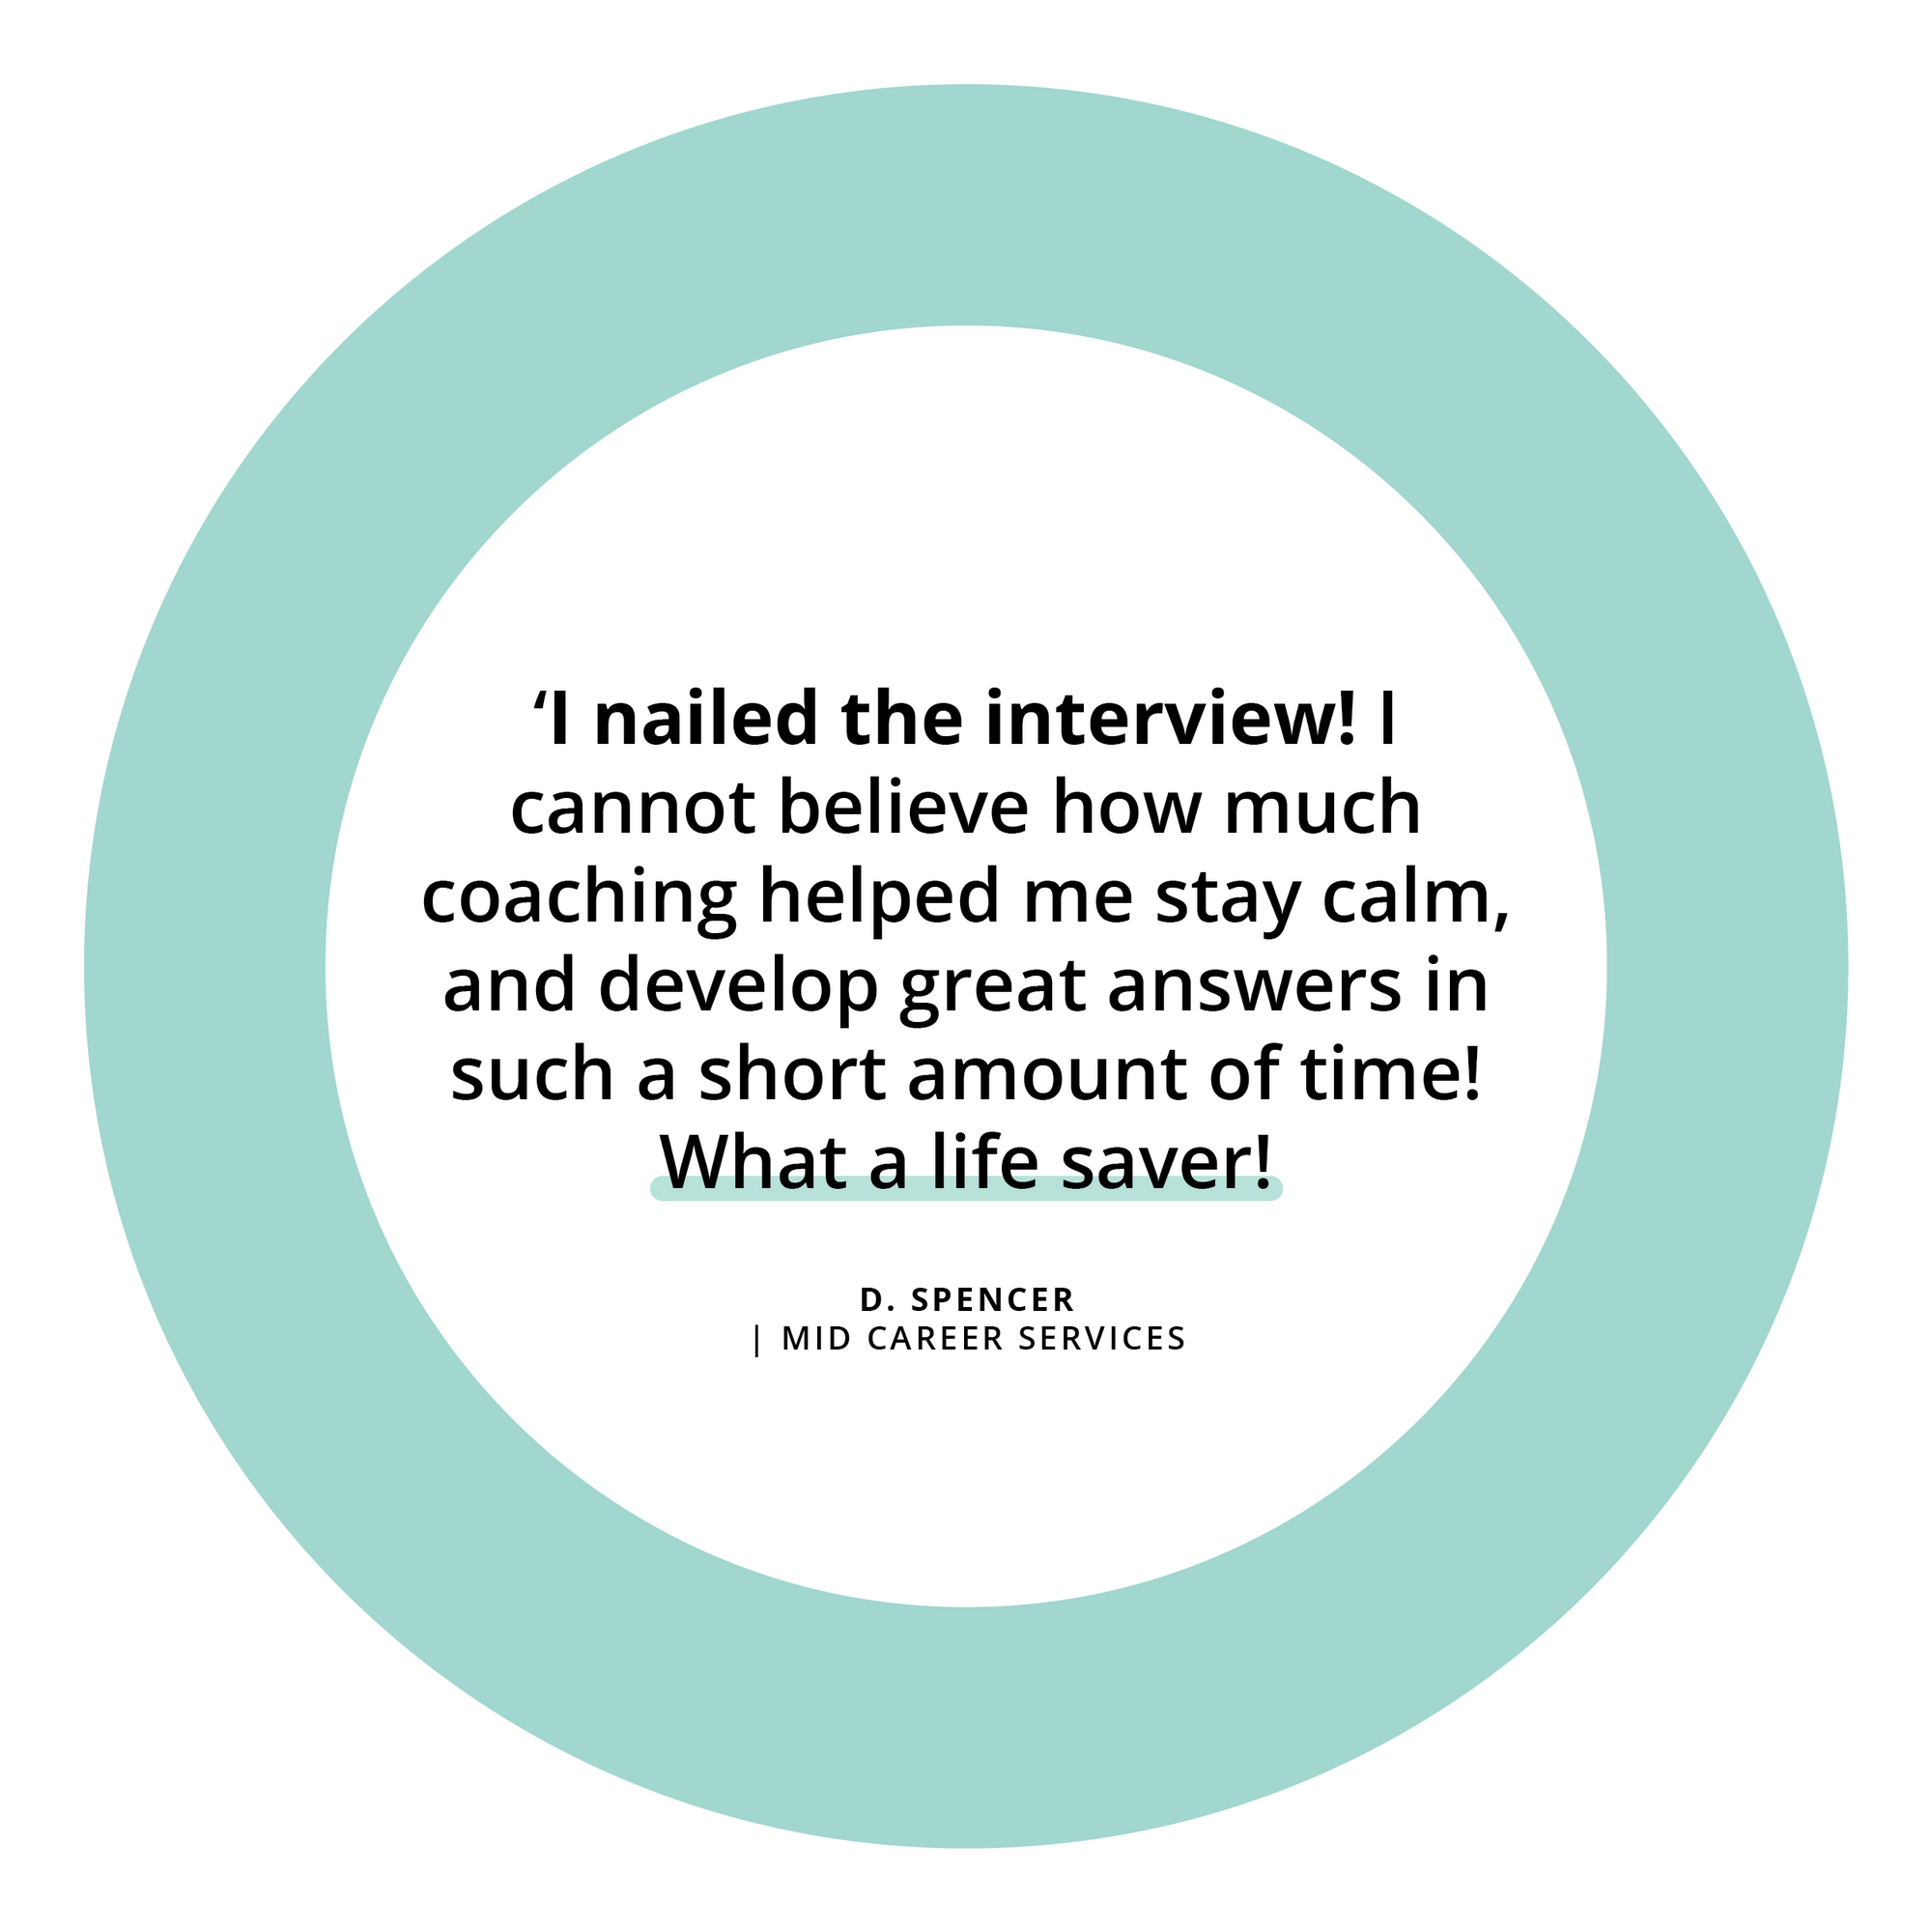 teal circle with client testimonial in the center